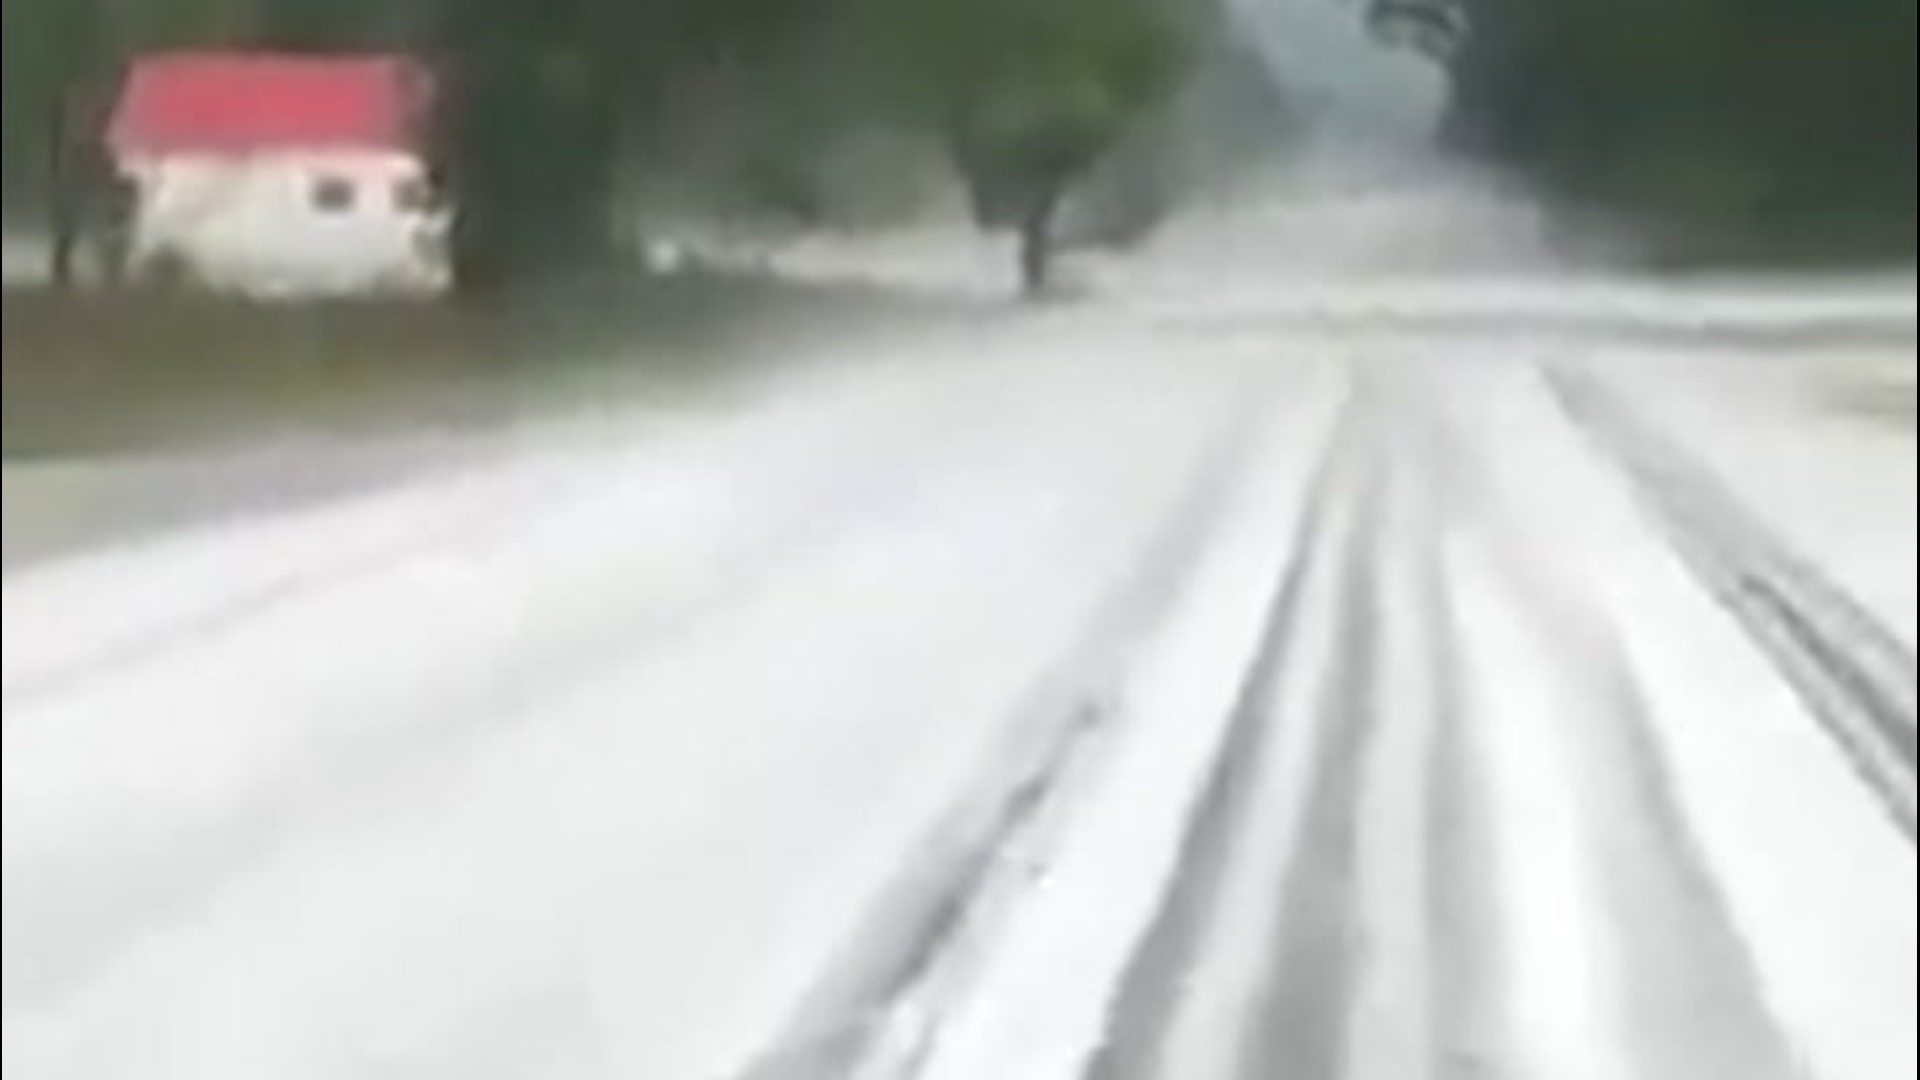 A line of severe thunderstorms dumped torrential hail in various parts of North Carolina on May 7, forcing people to retreat inside their homes to get out of the weather.